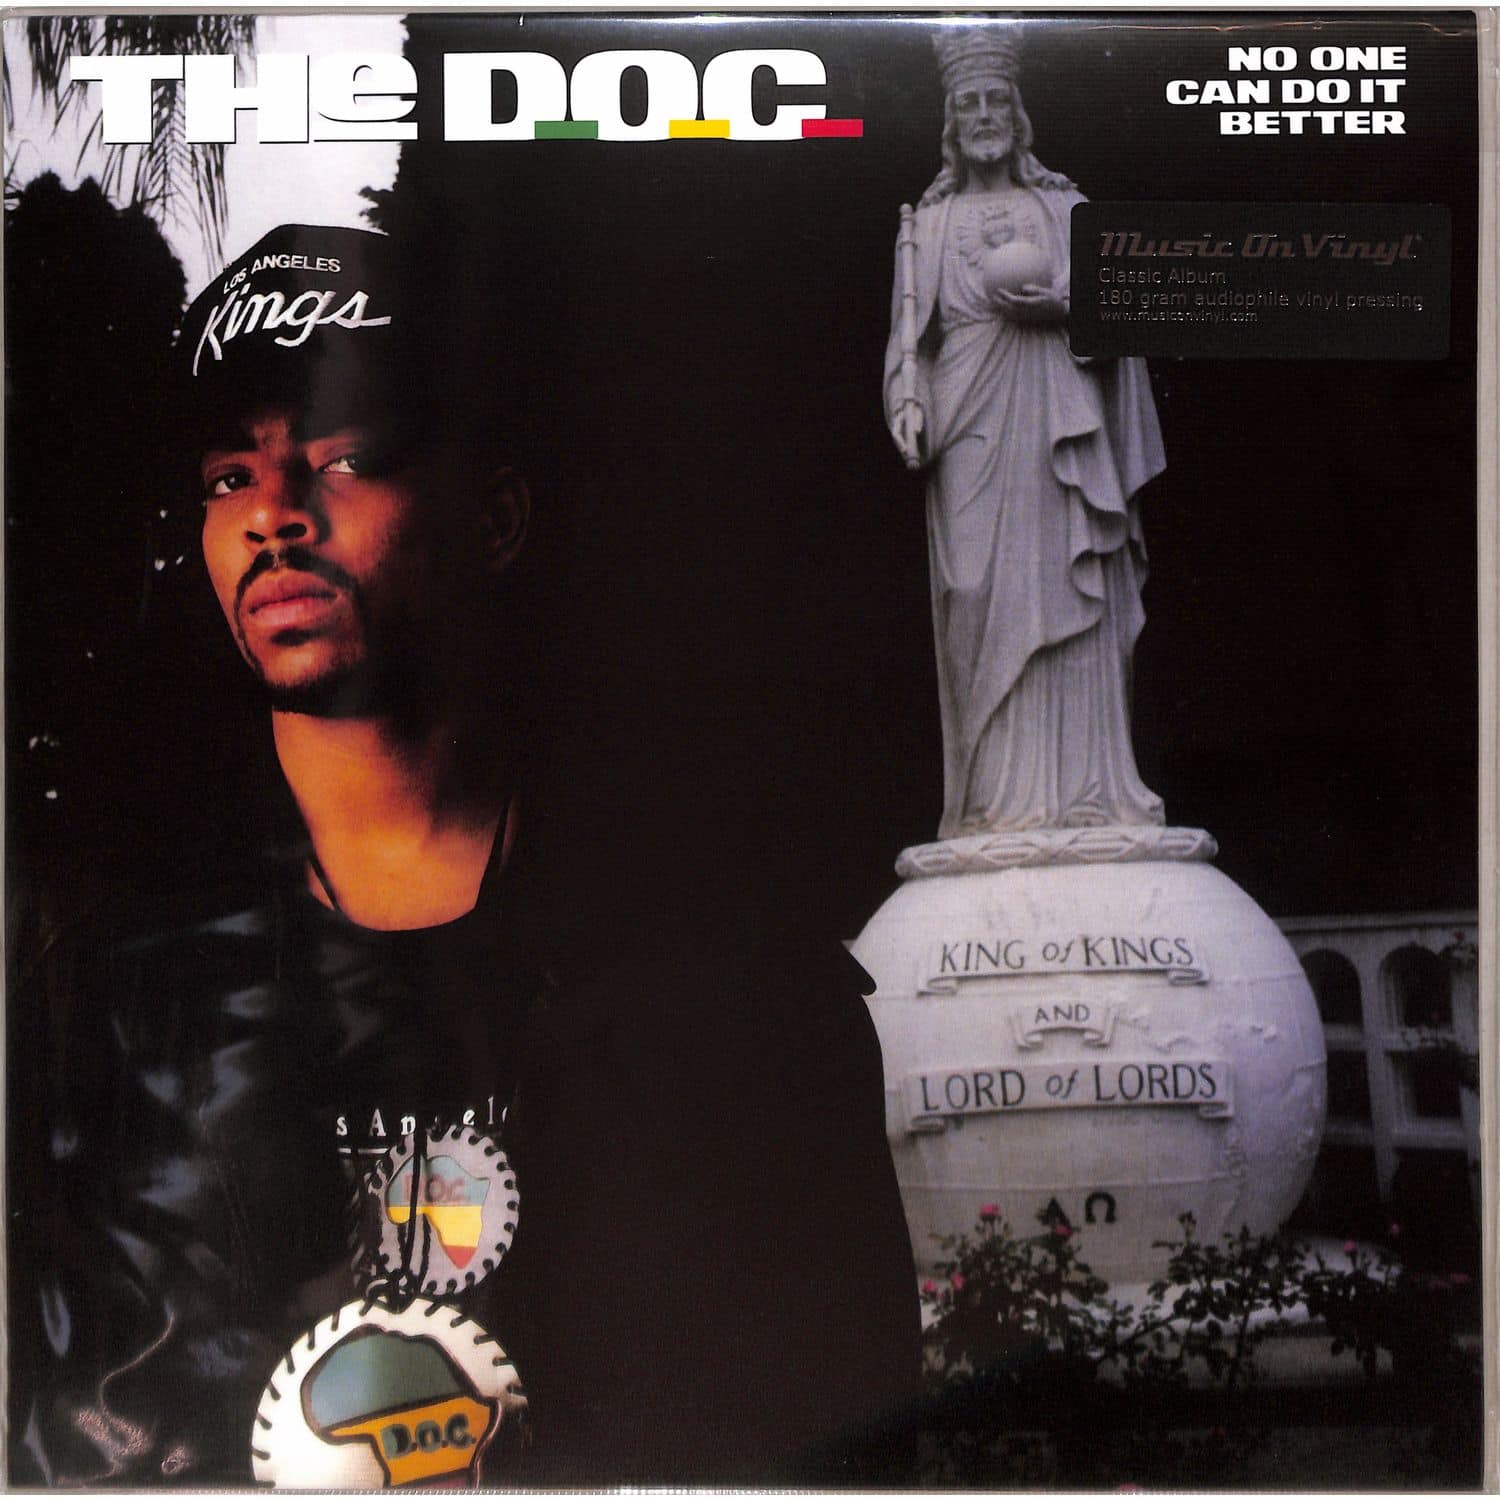 D.O.C. - NO ONE CAN DO IT BETTER 